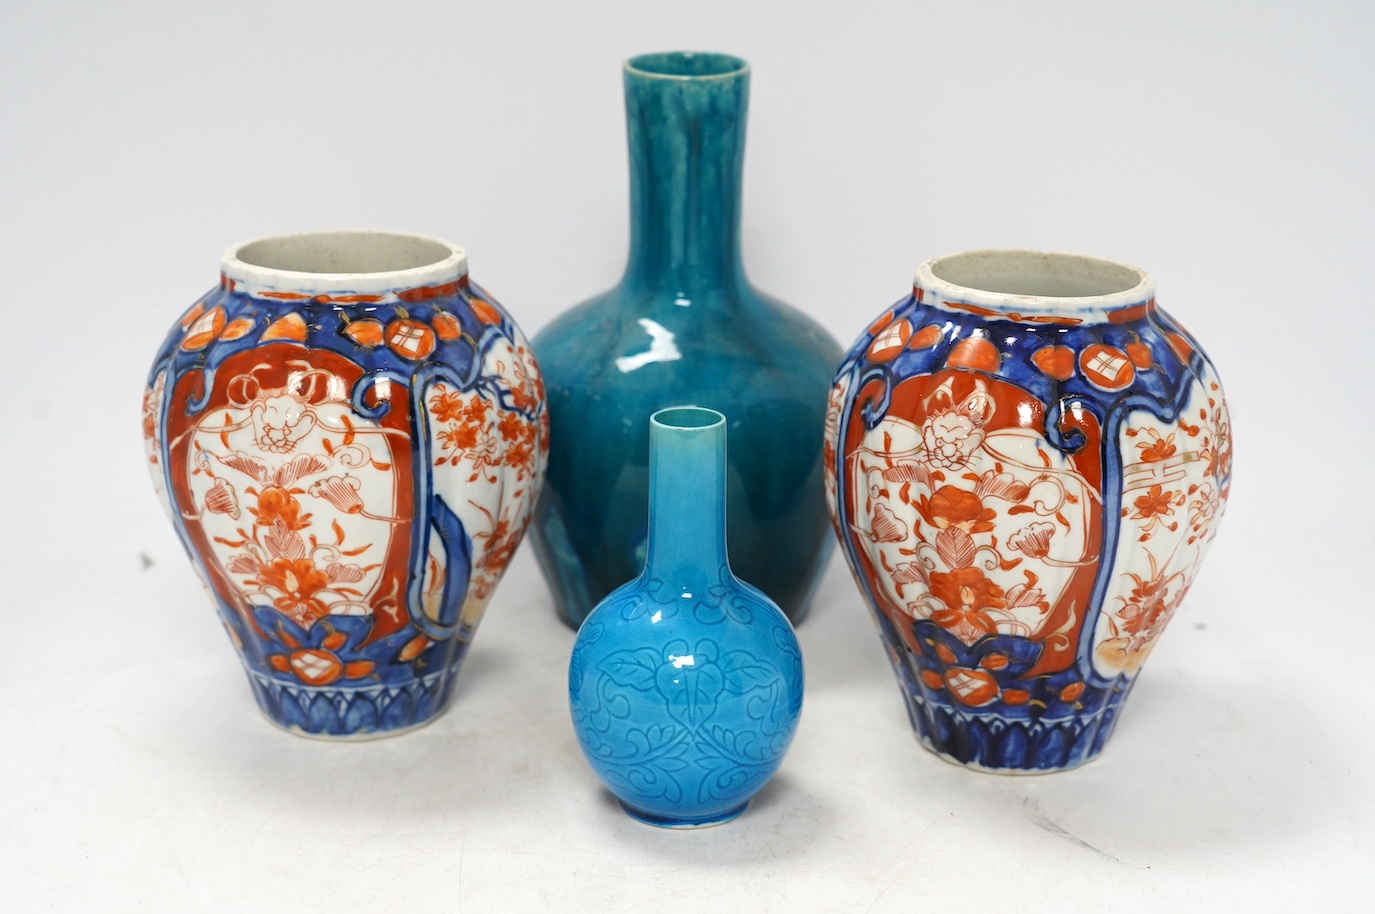 Two Japanese turquoise glazed vases and two Imari vases, tallest 21cm high (4). Condition - turquoise vases good, a chip to top edge of one Imari vase